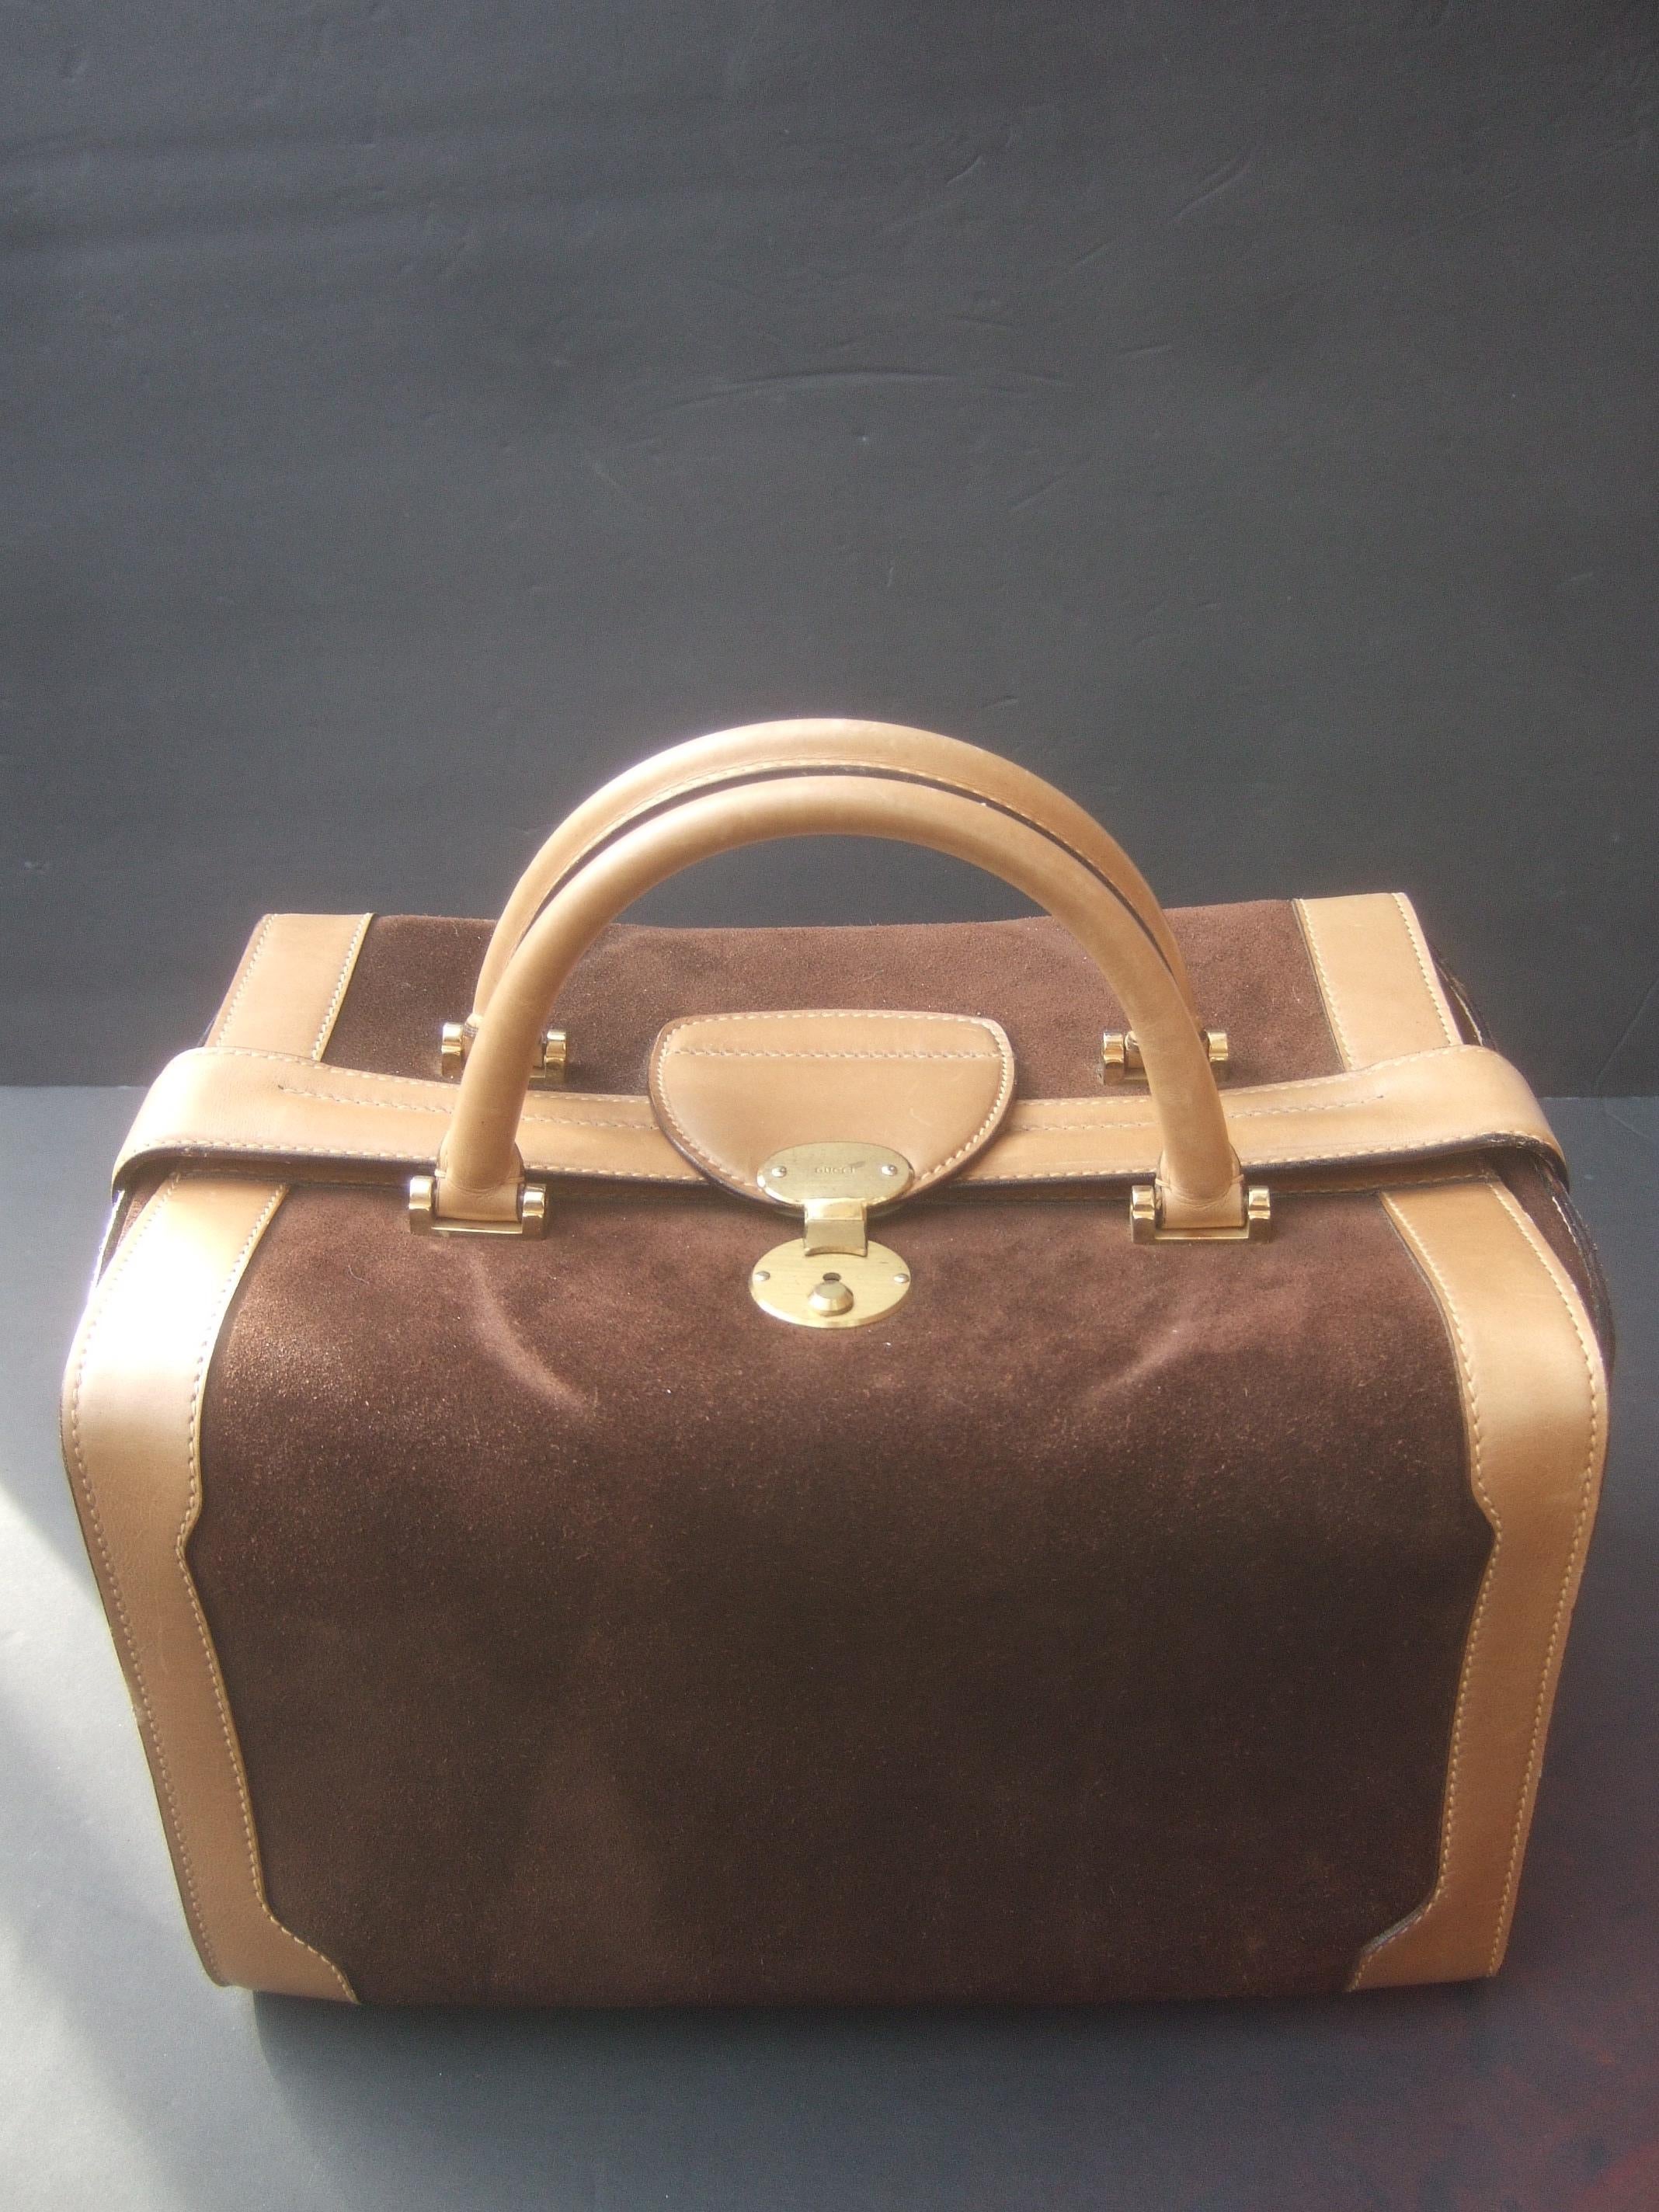 Gucci Italy Rare Chocolate Brown Suede Leather Trim Train Case c 1970s 1